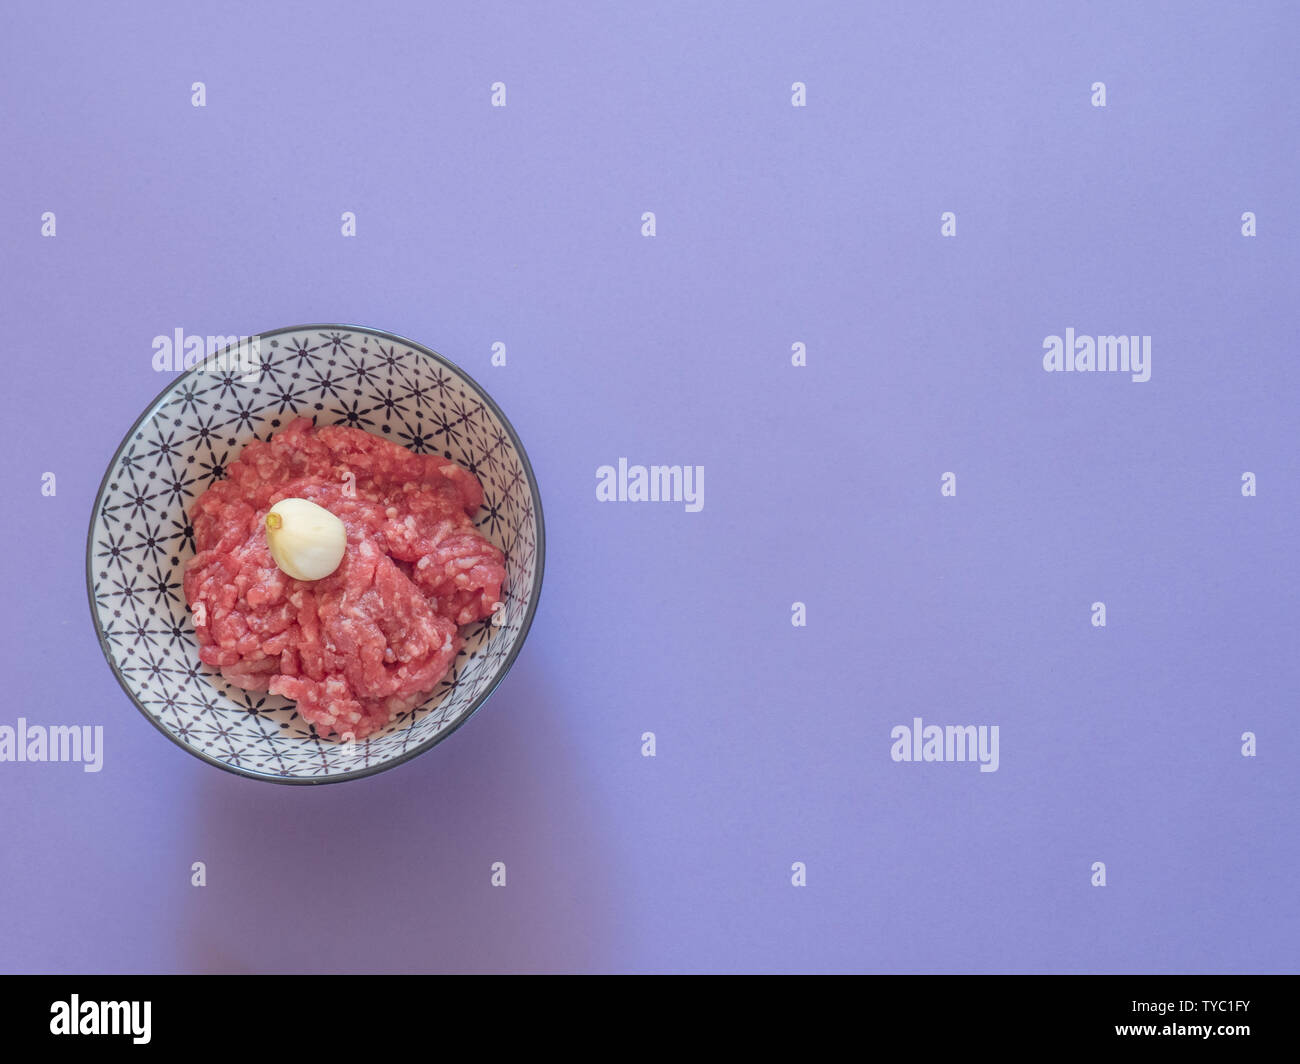 Minced beef meat in a bowl on purple background with copy space Stock Photo